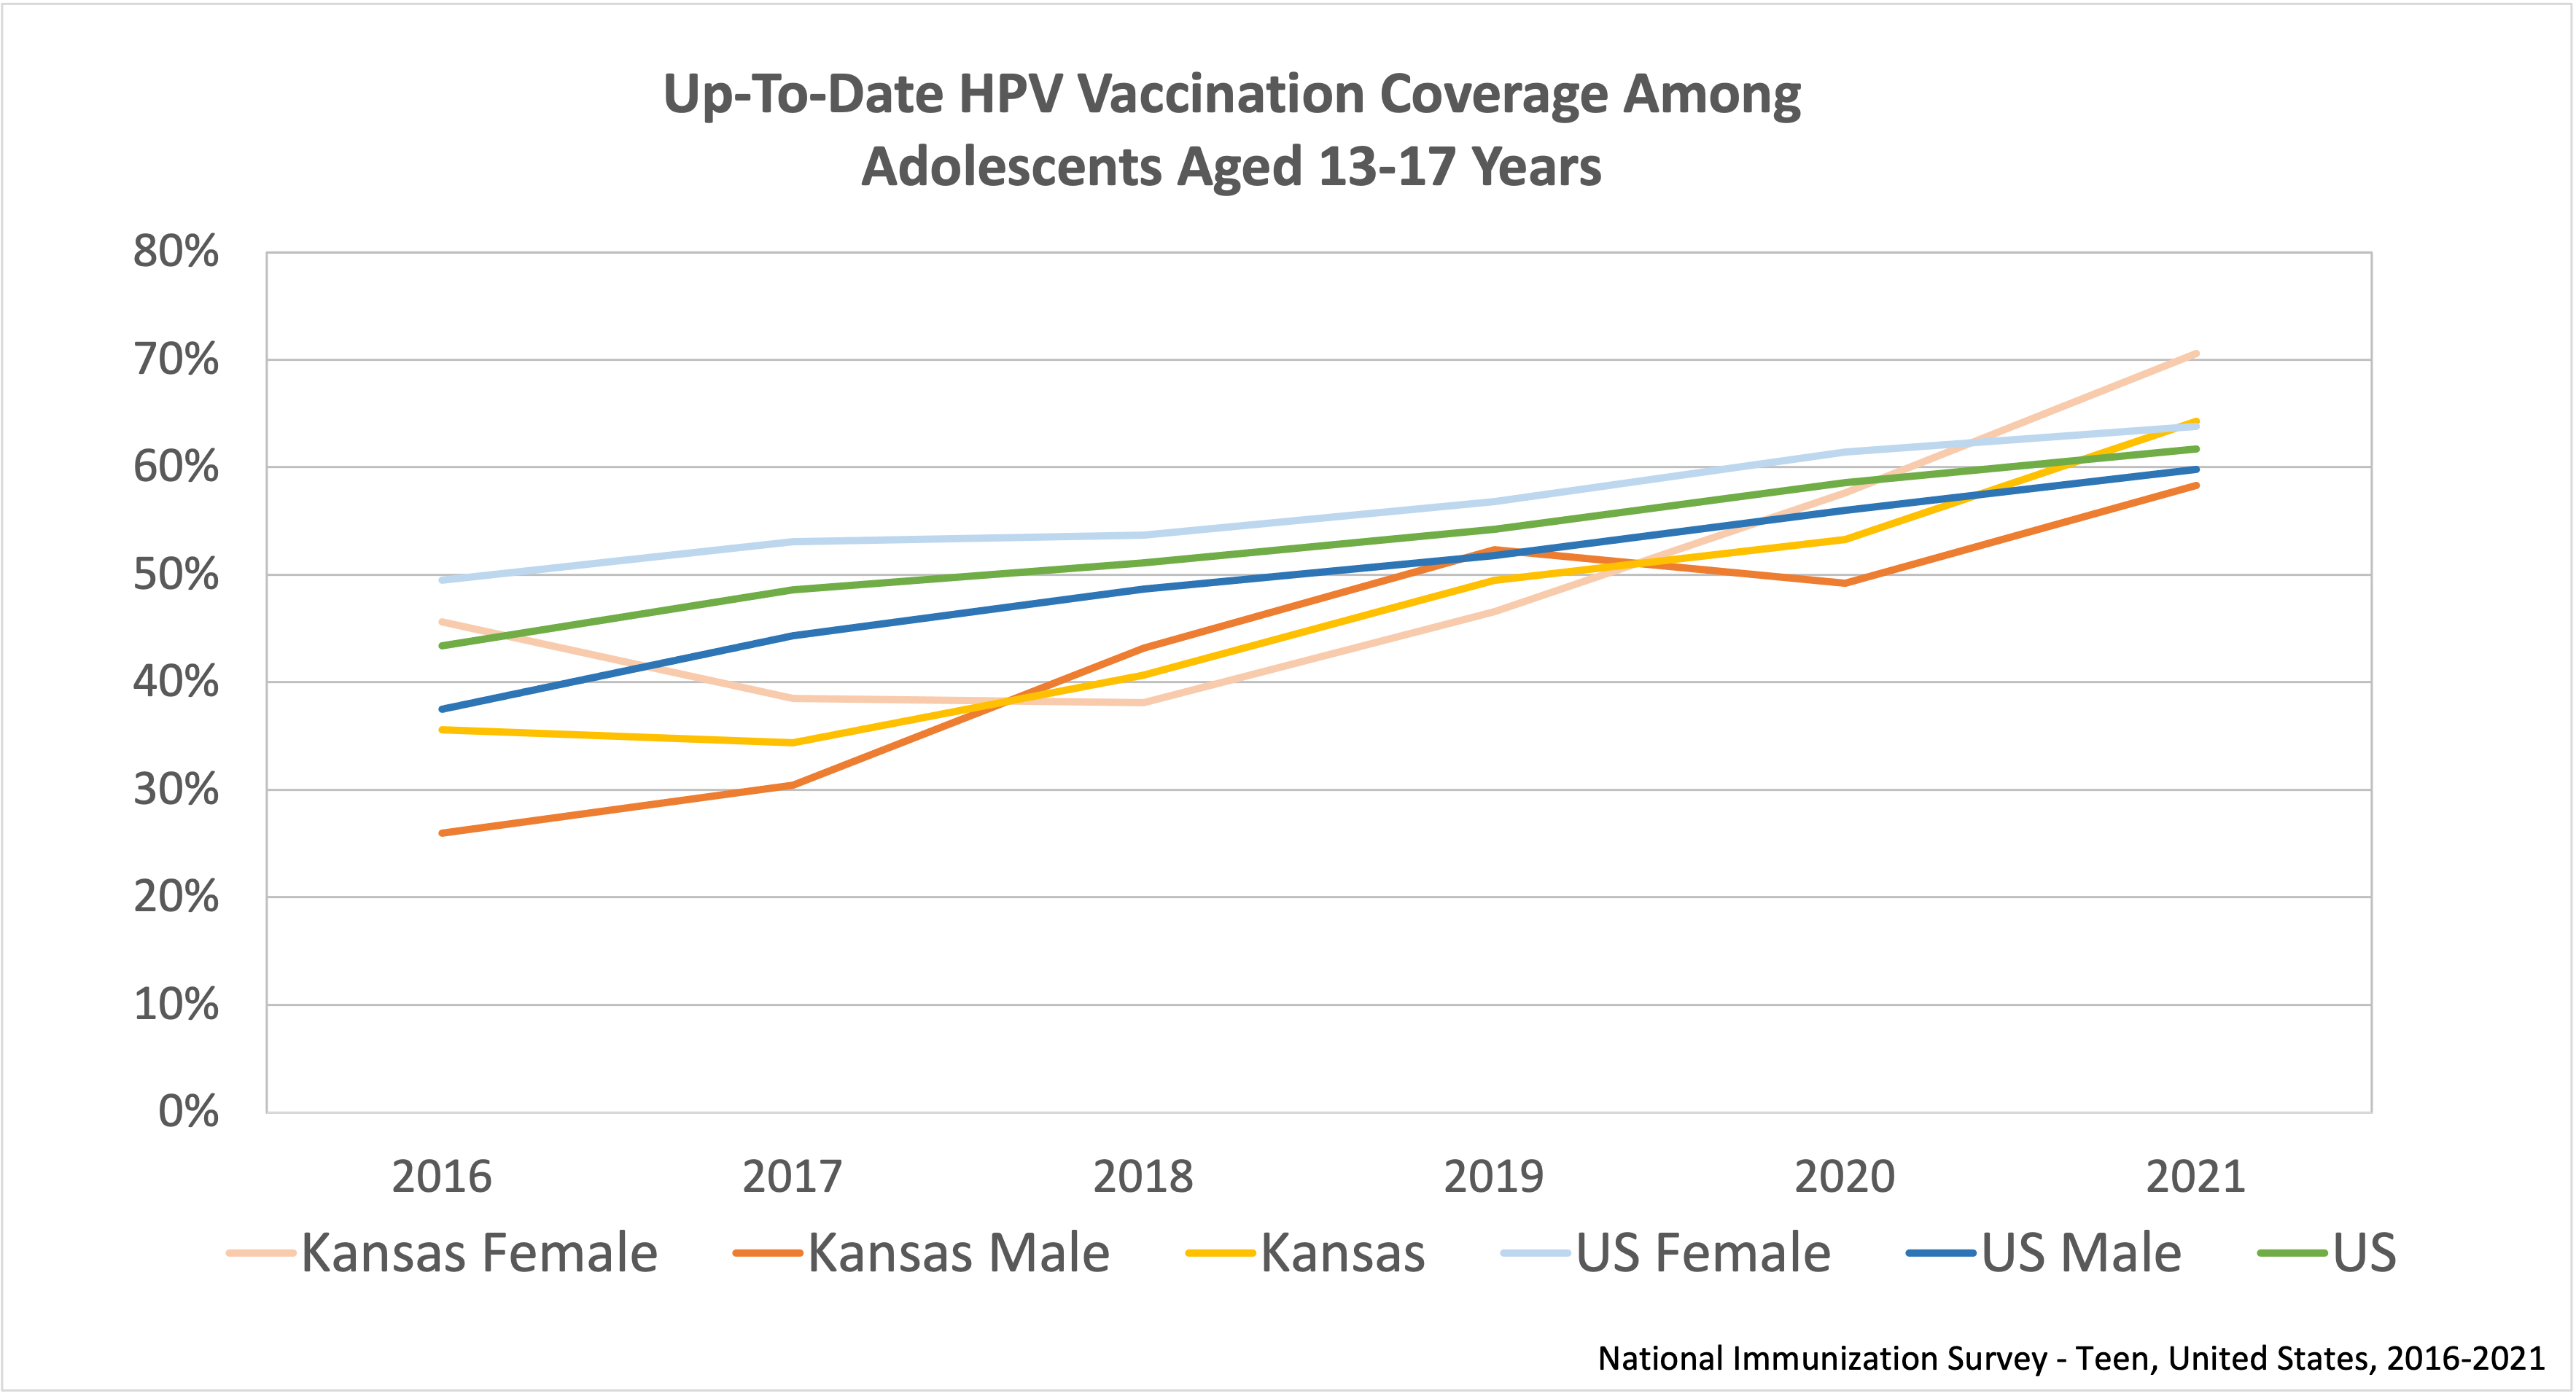 Up-To-Date HPV Vaccination Coverage Among Adolescents Aged 13-17 Years